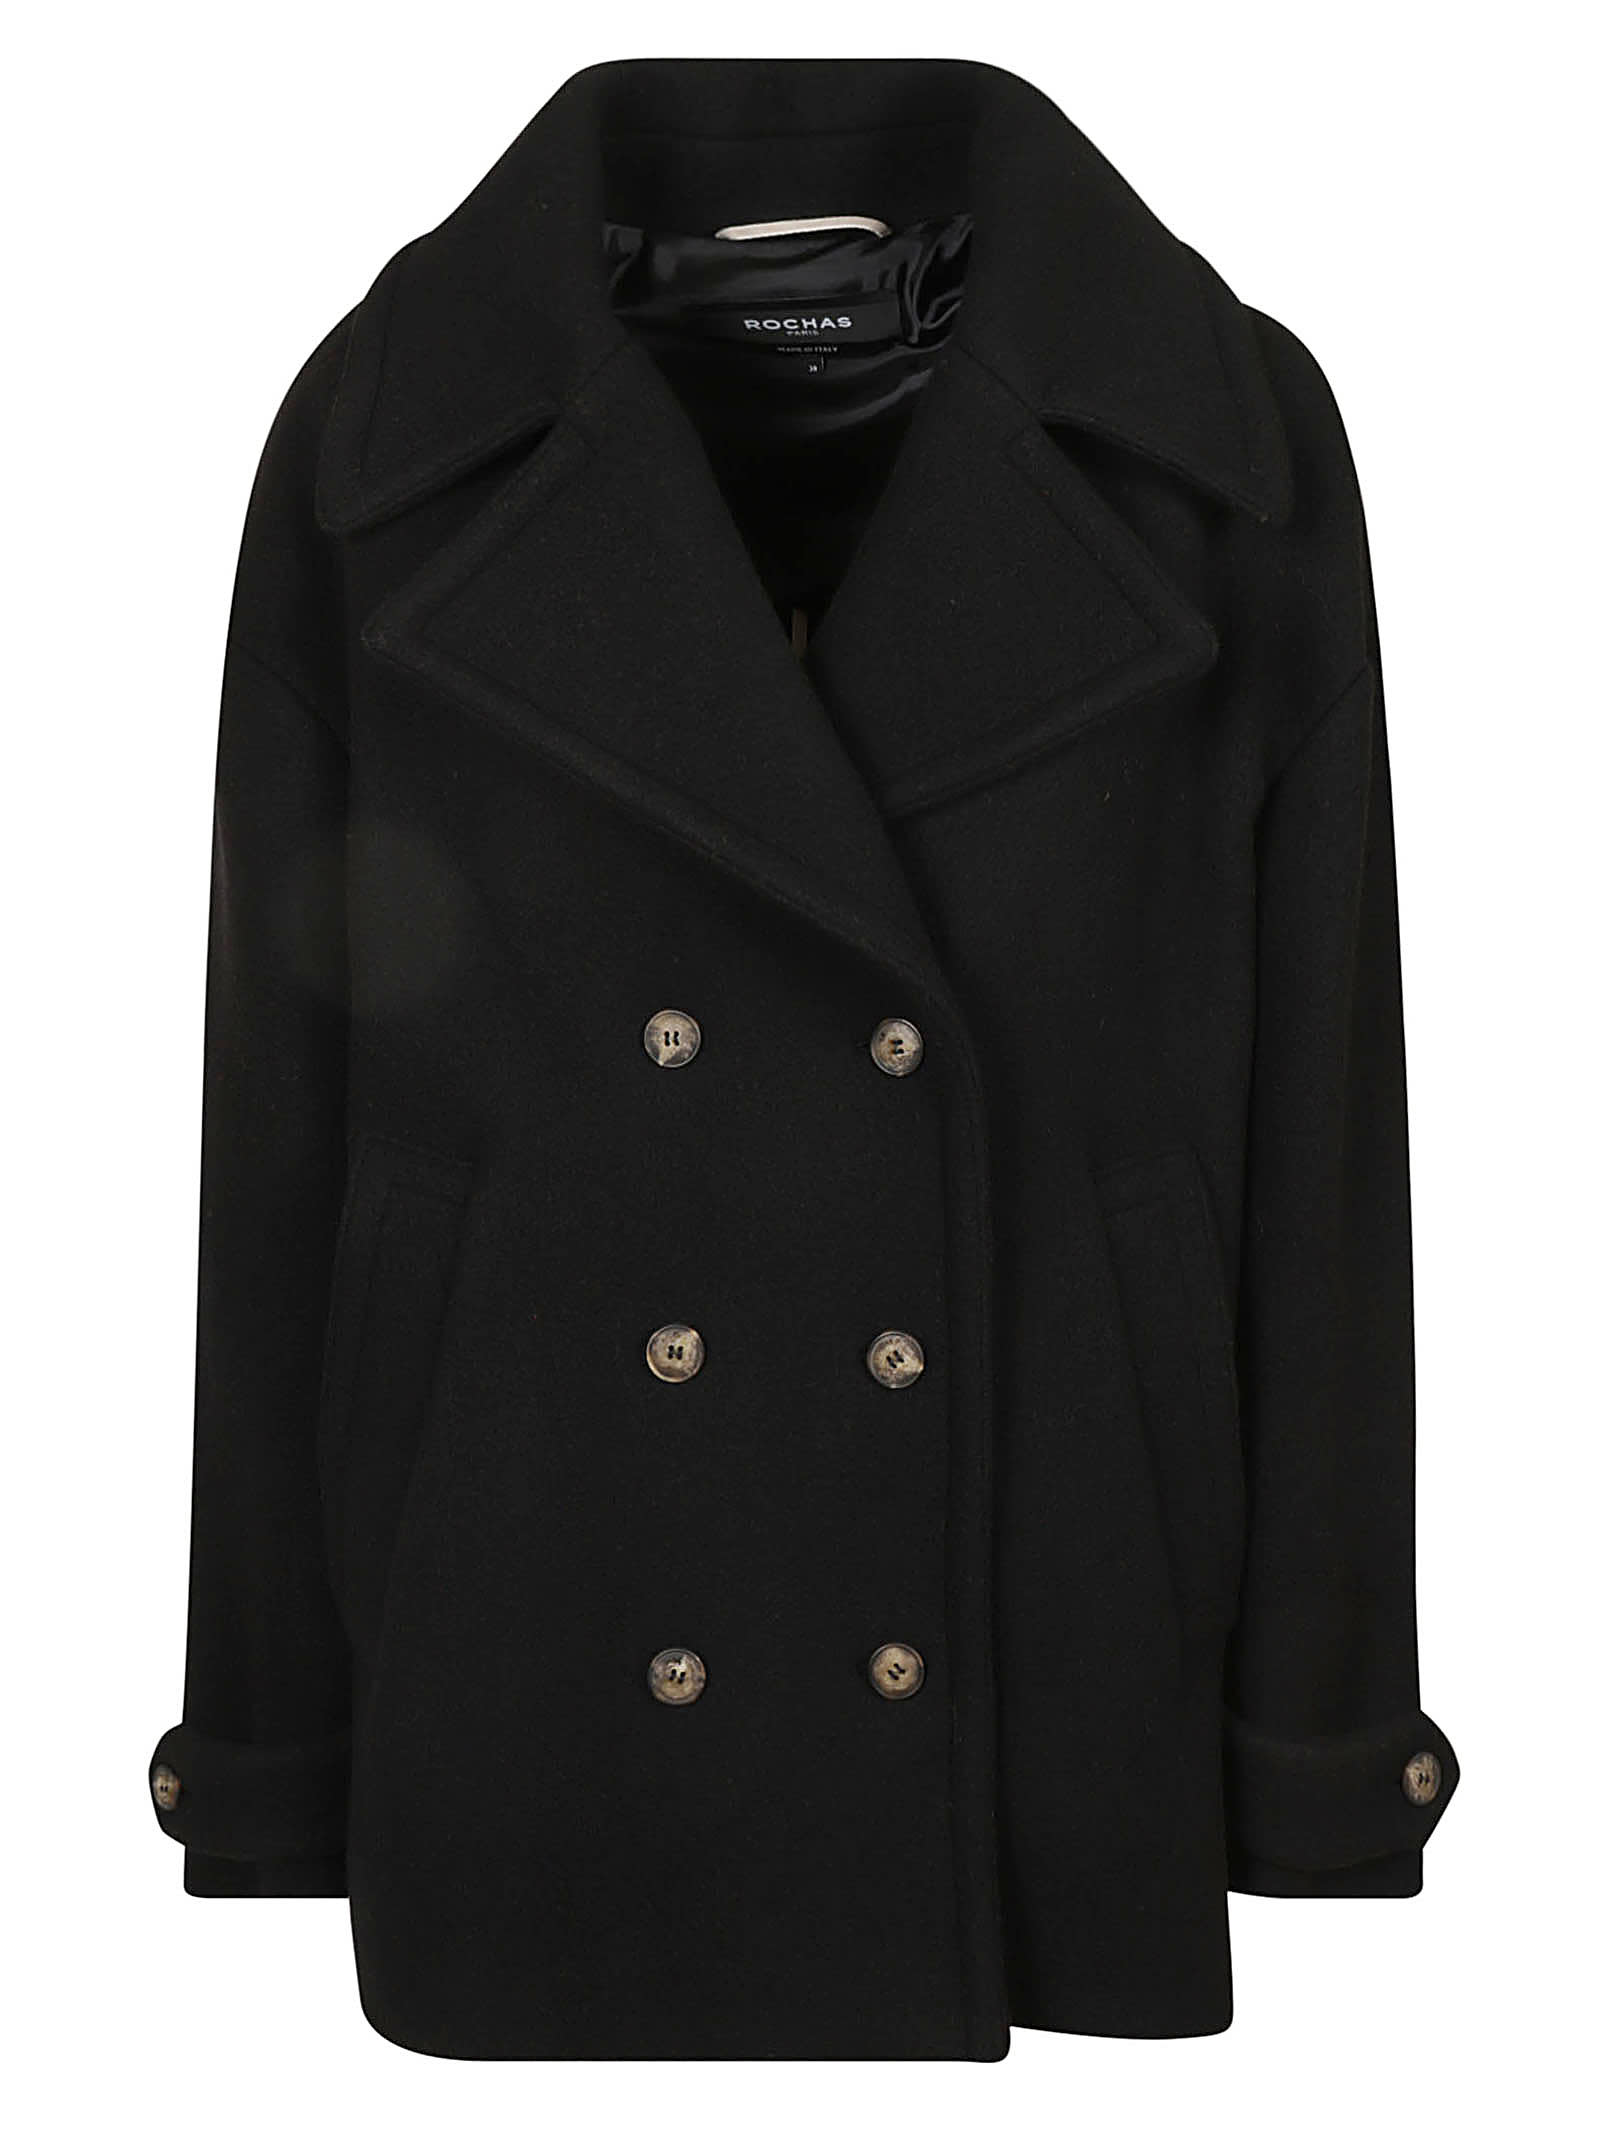 Rochas Classic Double-breasted Pea Coat